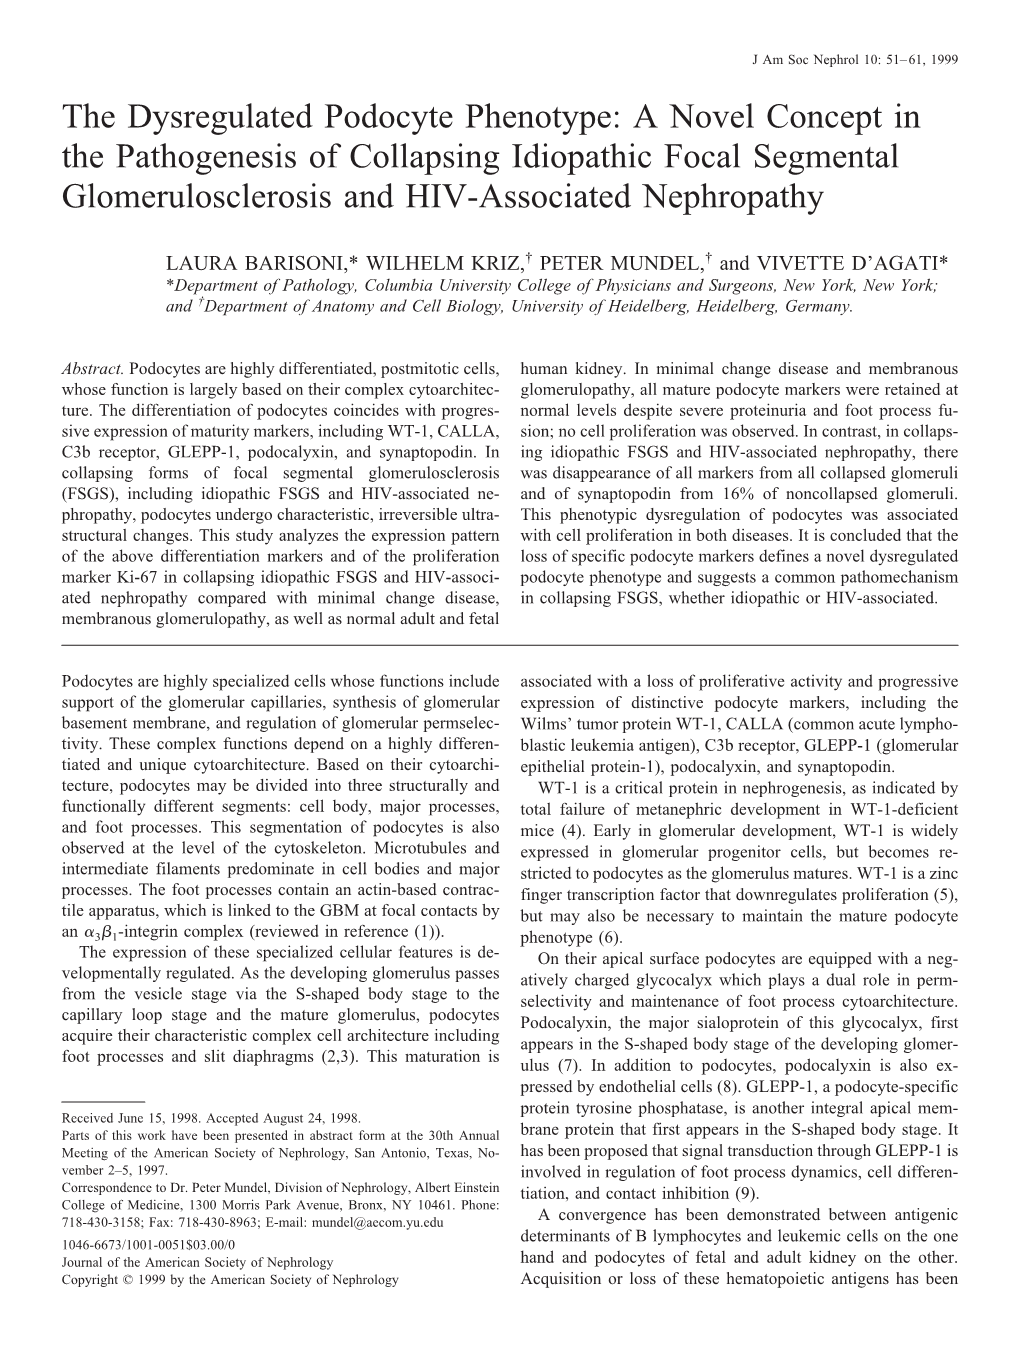 A Novel Concept in the Pathogenesis of Collapsing Idiopathic Focal Segmental Glomerulosclerosis and HIV-Associated Nephropathy